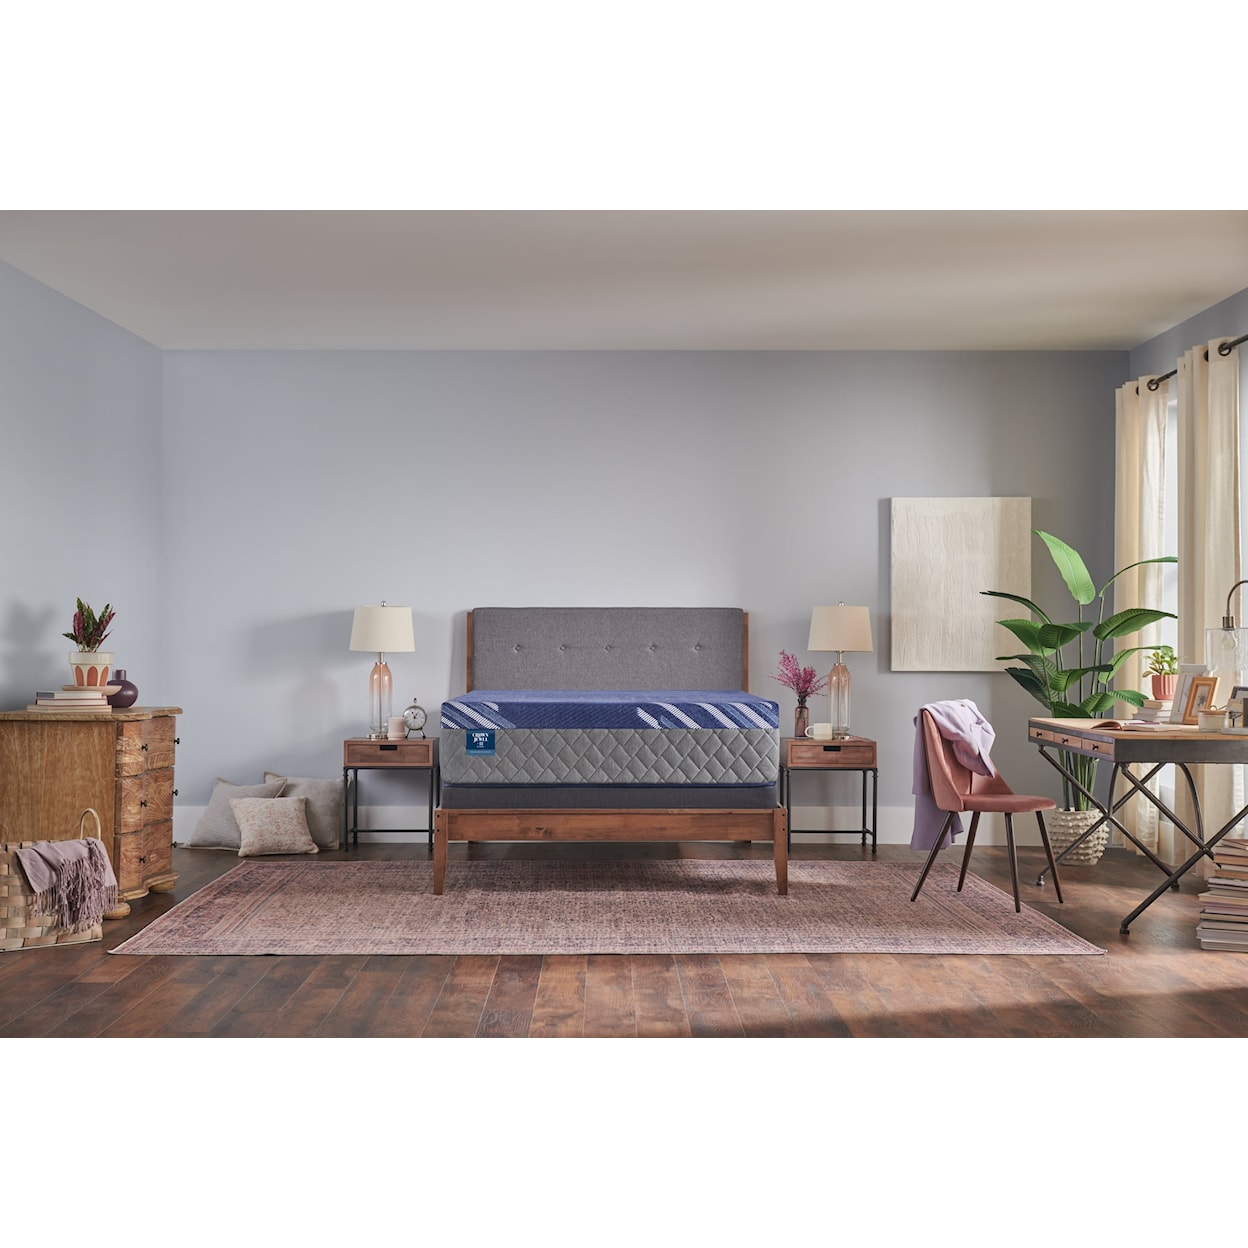 Sealy Crown Jewel H8 Eighth & Park Soft Twin Long Mattress